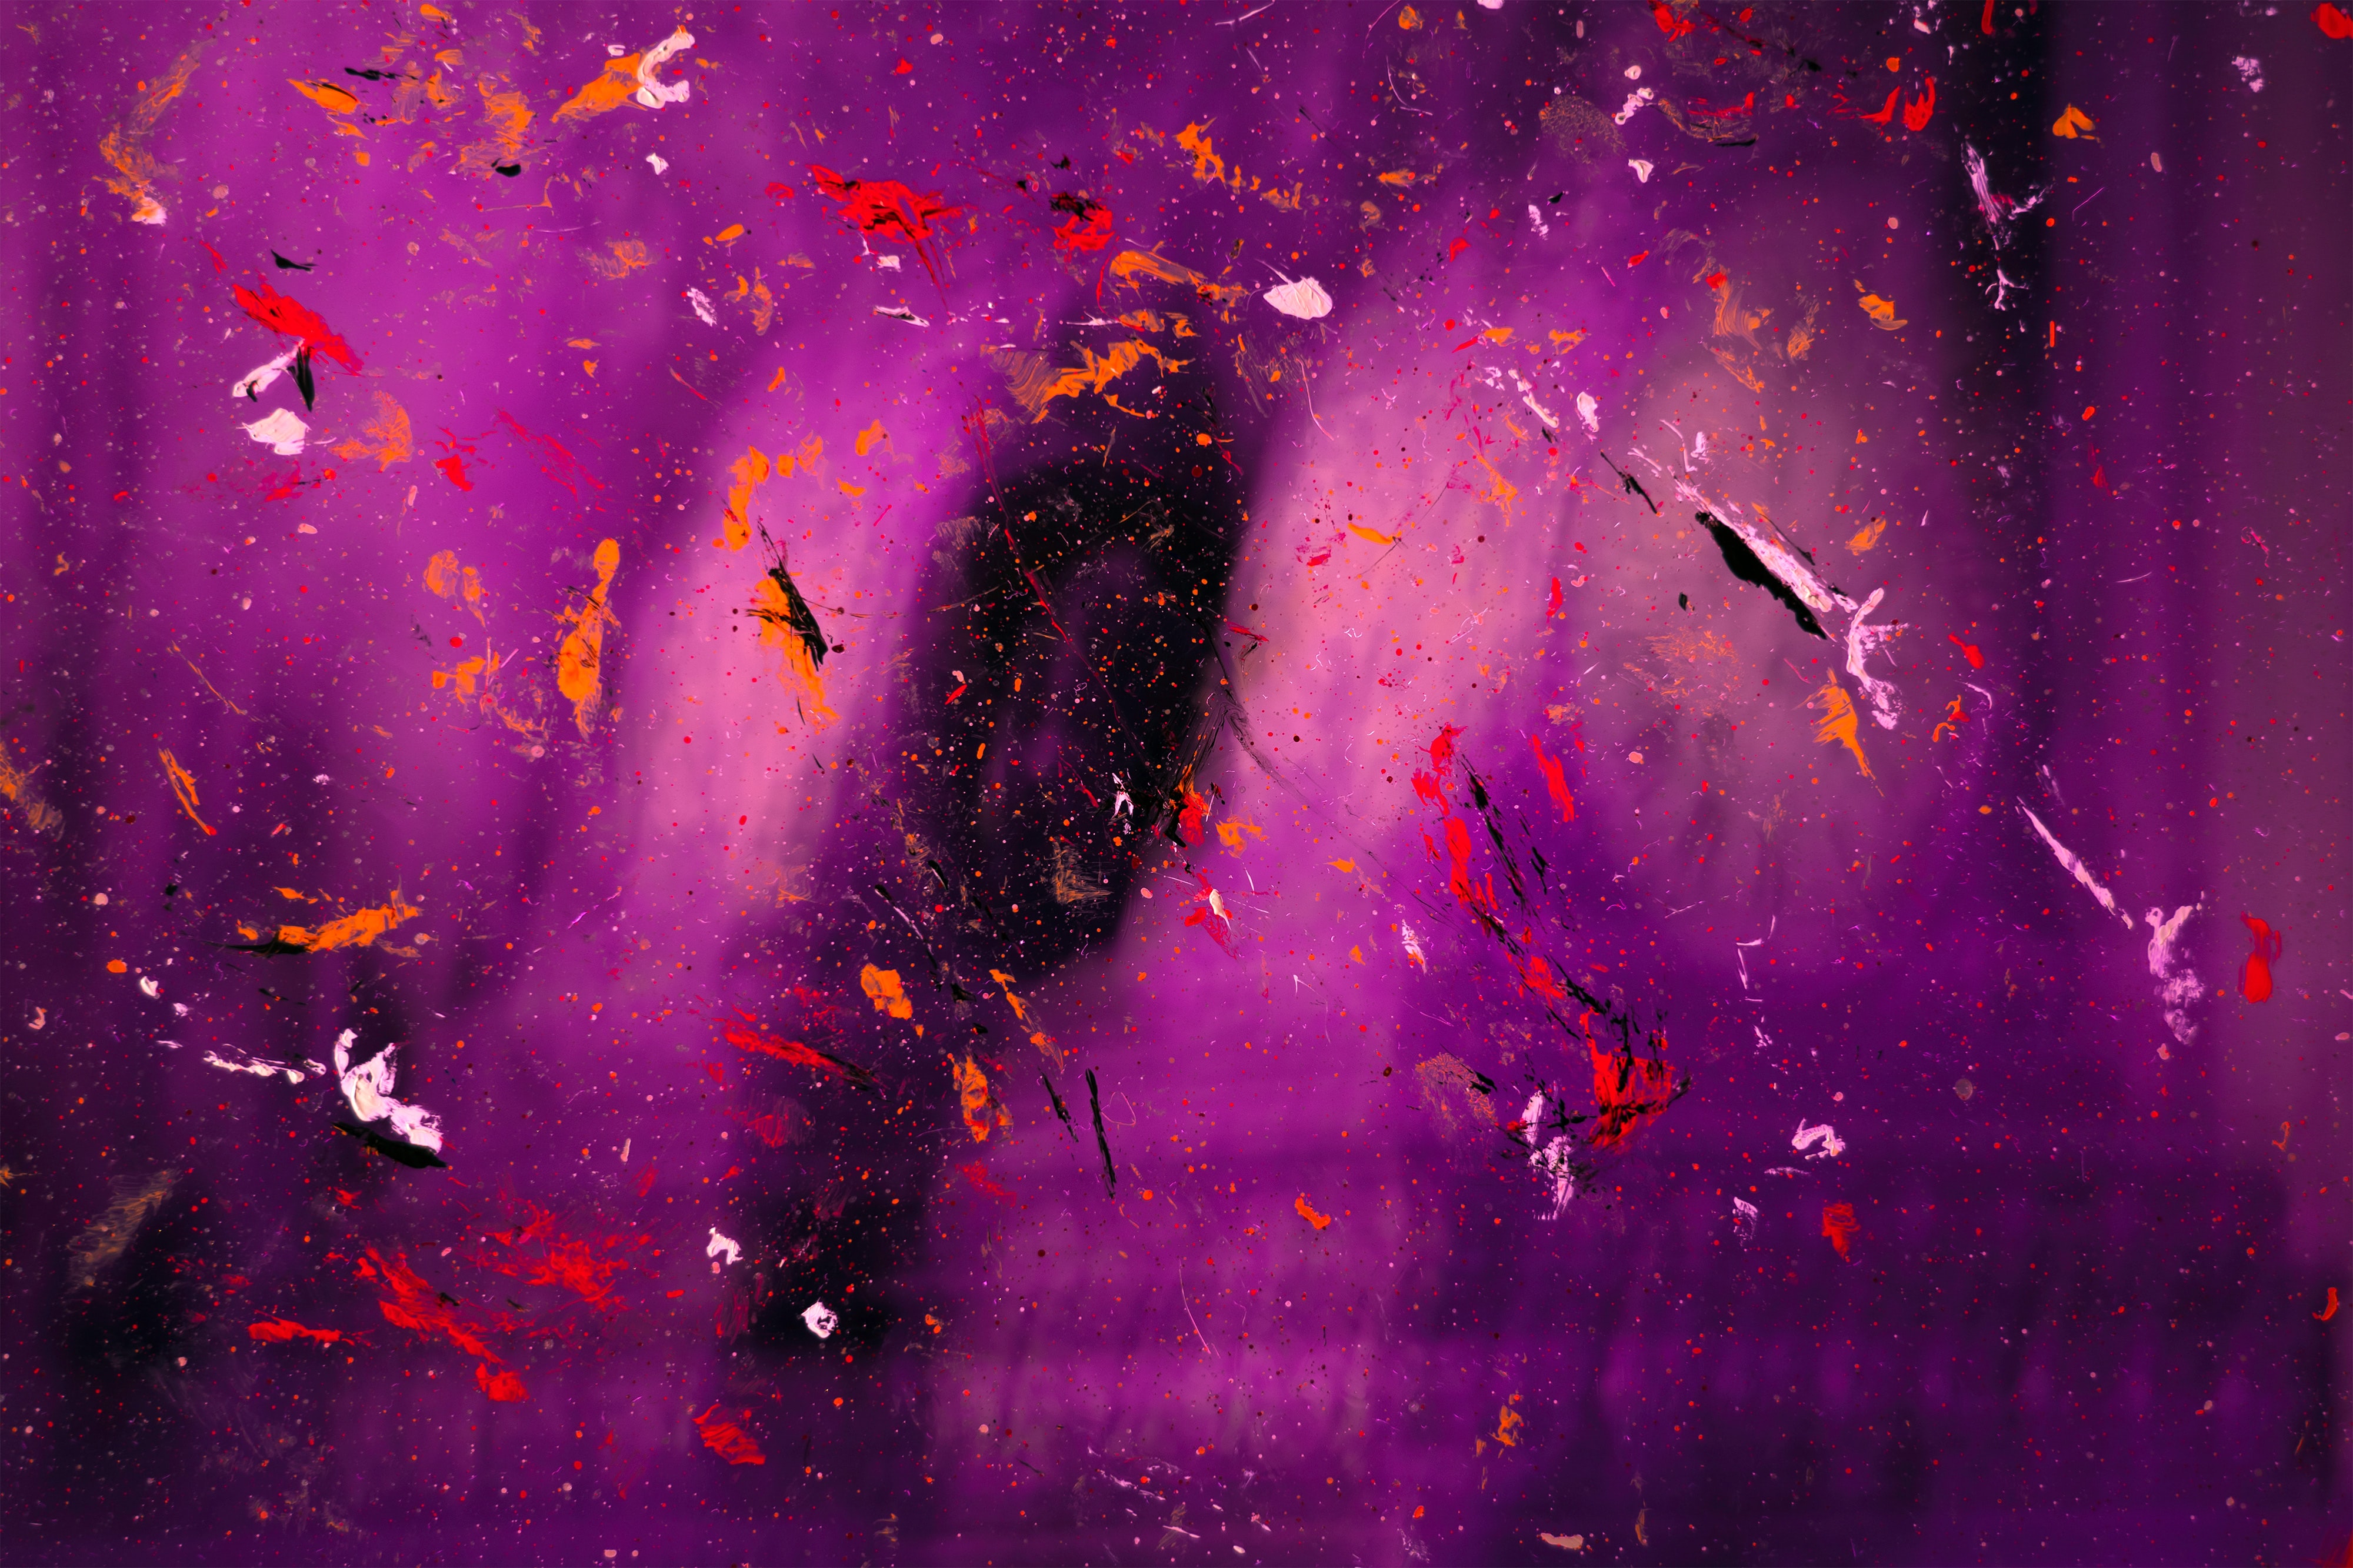 Windows Backgrounds purple, abstract, violet, paint, surface, glass, stains, spots